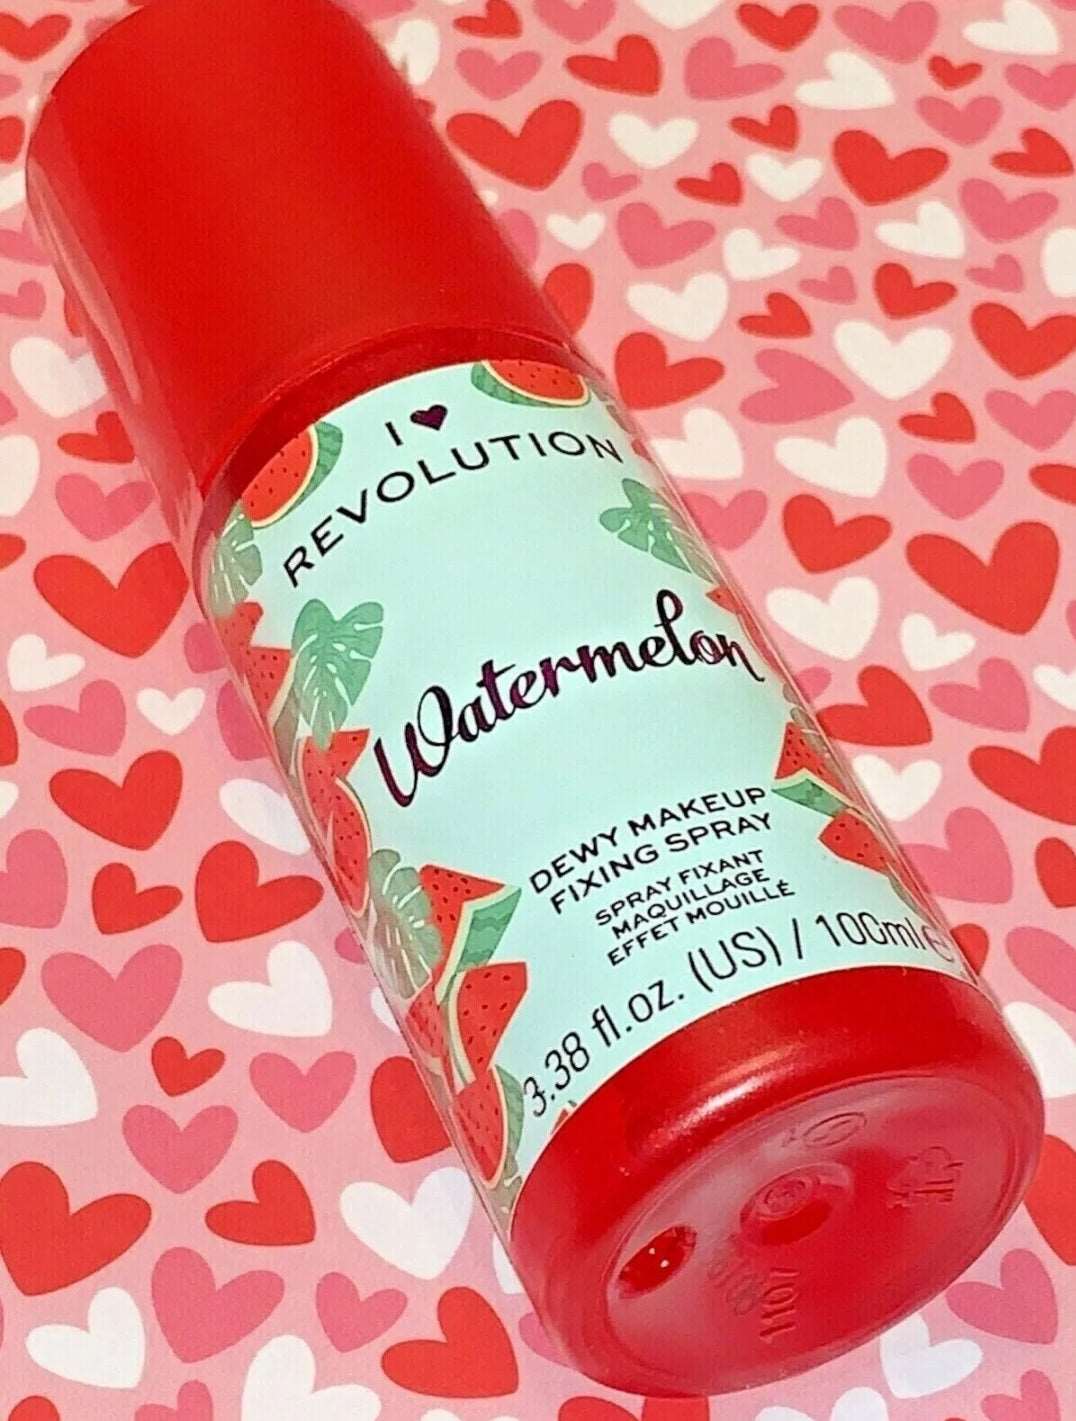 Fissatore Makeup Per Pelle Secca I Heart Revolution Dewy Makeup Fixing Spray For Dry Skin Types Watermelon Flavour 100ml - SANDY'S MAKEUP AND ARTISTRY 